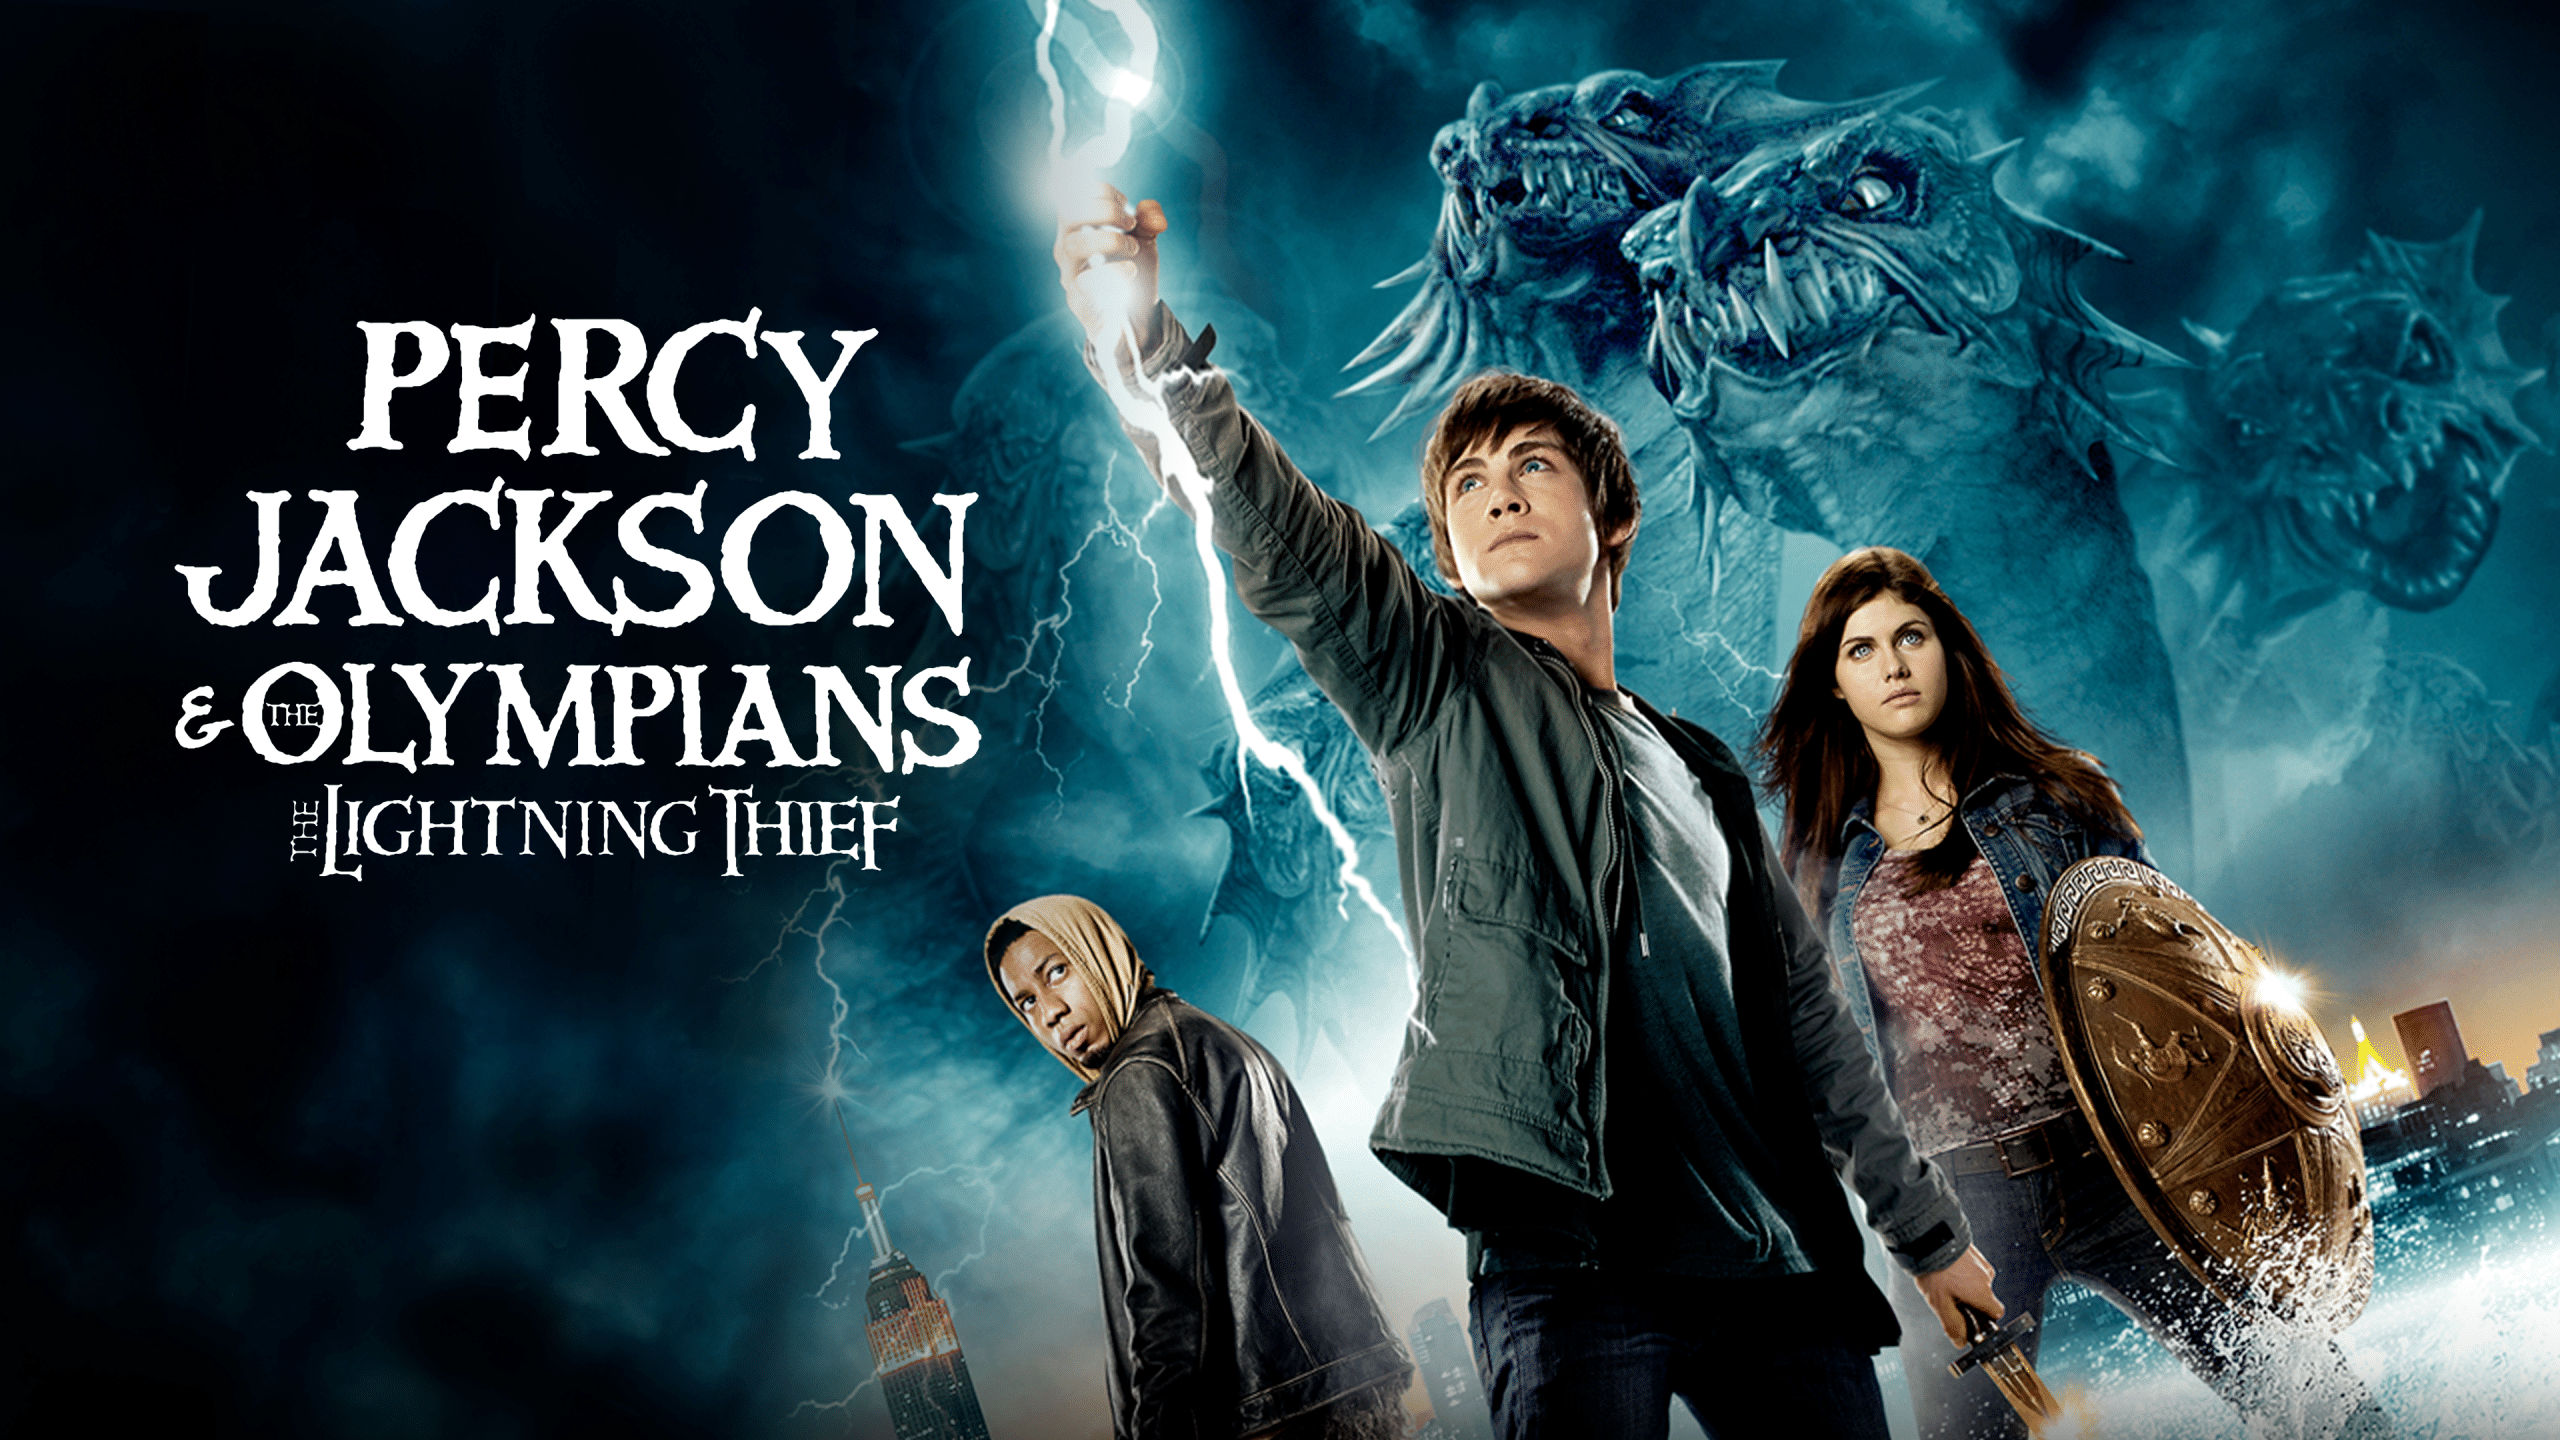 movie review of percy jackson and the lightning thief